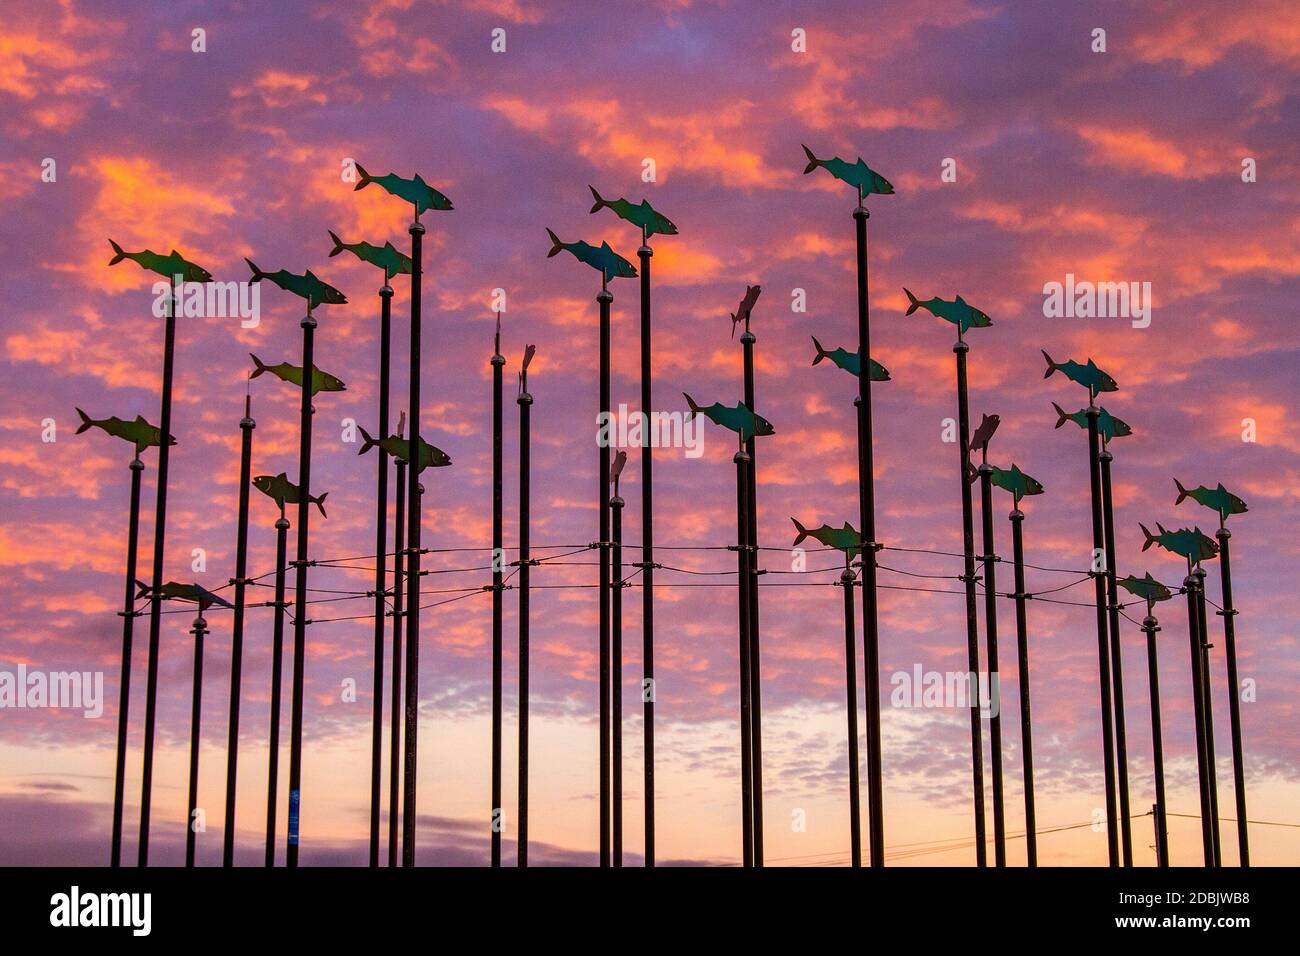 https://c8.alamy.com/comp/2DBJWB8/fish-on-poles-mobil-swivelling-art-feature-statue-piscatorial-seaside-architecture-of-weather-vanes-on-the-southport-coastal-promenade-merseyside-uk-this-tall-structure-features-metal-fish-cut-outs-on-long-poles-like-a-shoal-of-fish-facing-different-directions-according-to-the-prevailing-winds-2DBJWB8.jpg